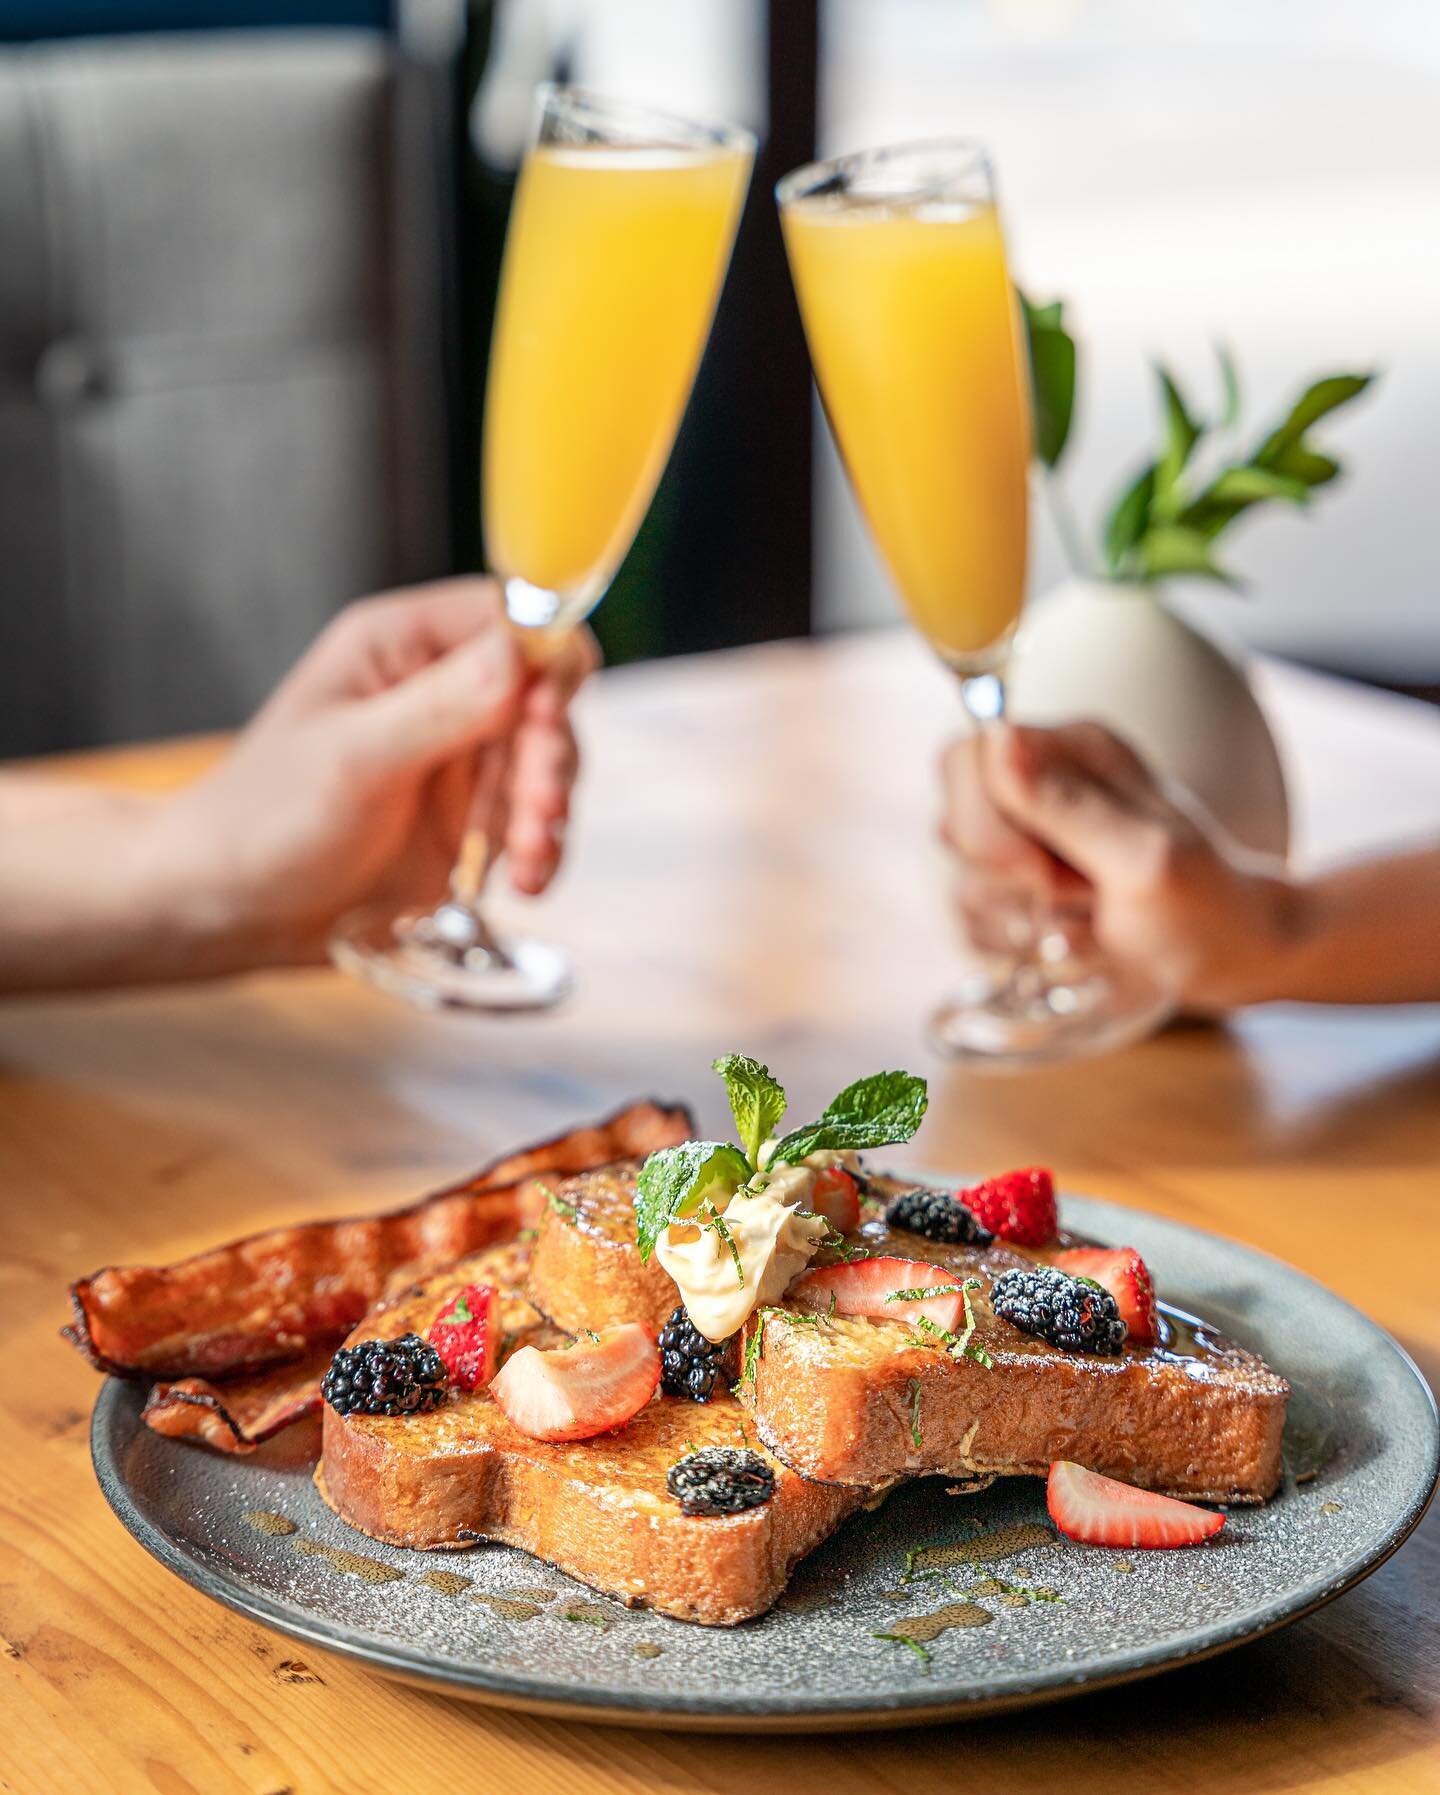 Tomorrow is Mother&rsquo;s Day, but as always, no reservations needed! Our Breakfast Menu is available 9am-11am, and Lunch Menu 11am-4pm. Our cases will also be filled with delicious treats for mom!

Pictured: French Toast
Brioche/ Honey mascarpone/ 